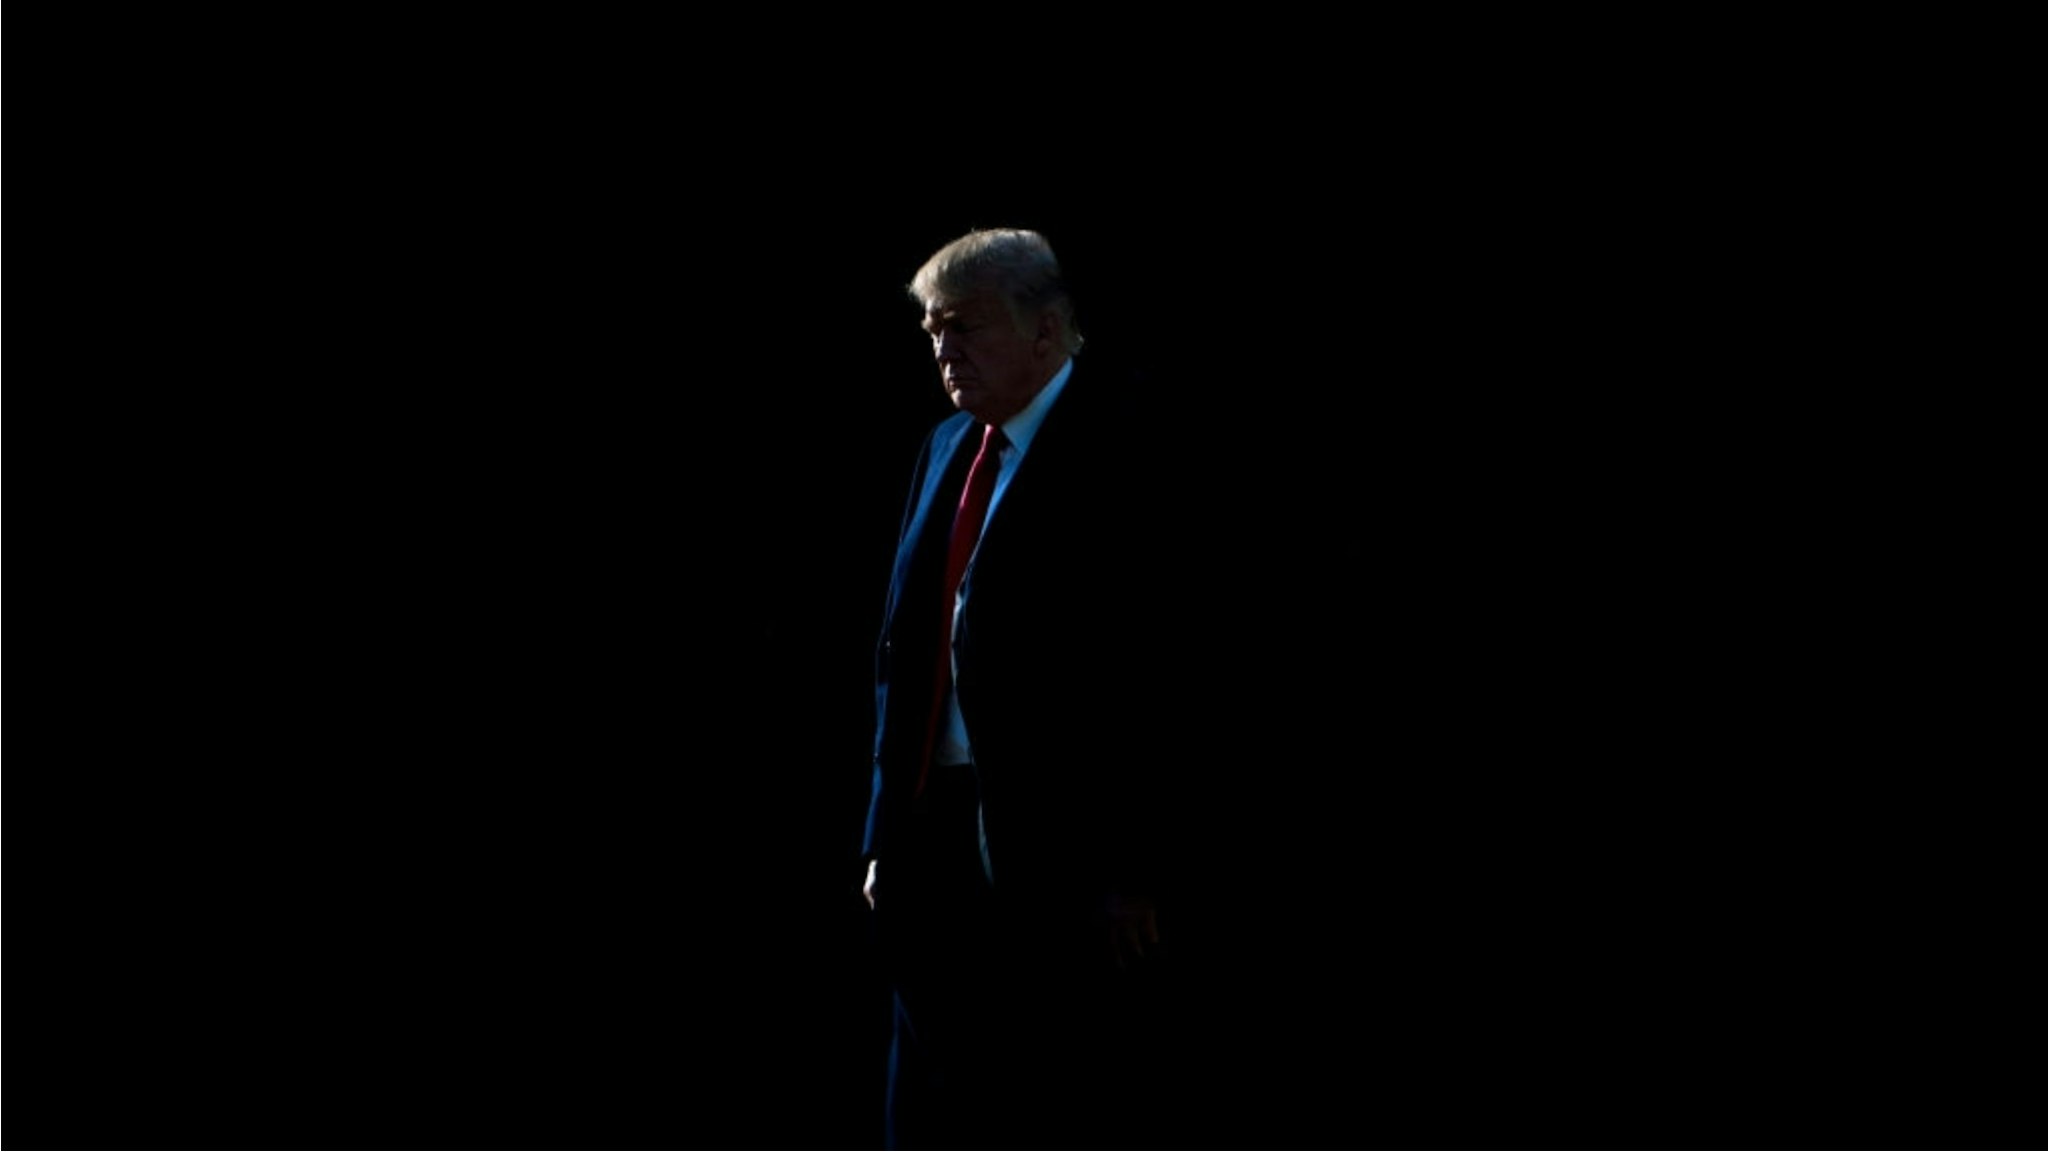 US President Donald Trump walks to Marine One on the South Lawn of the White House December 21, 2017 in Washington, DC.